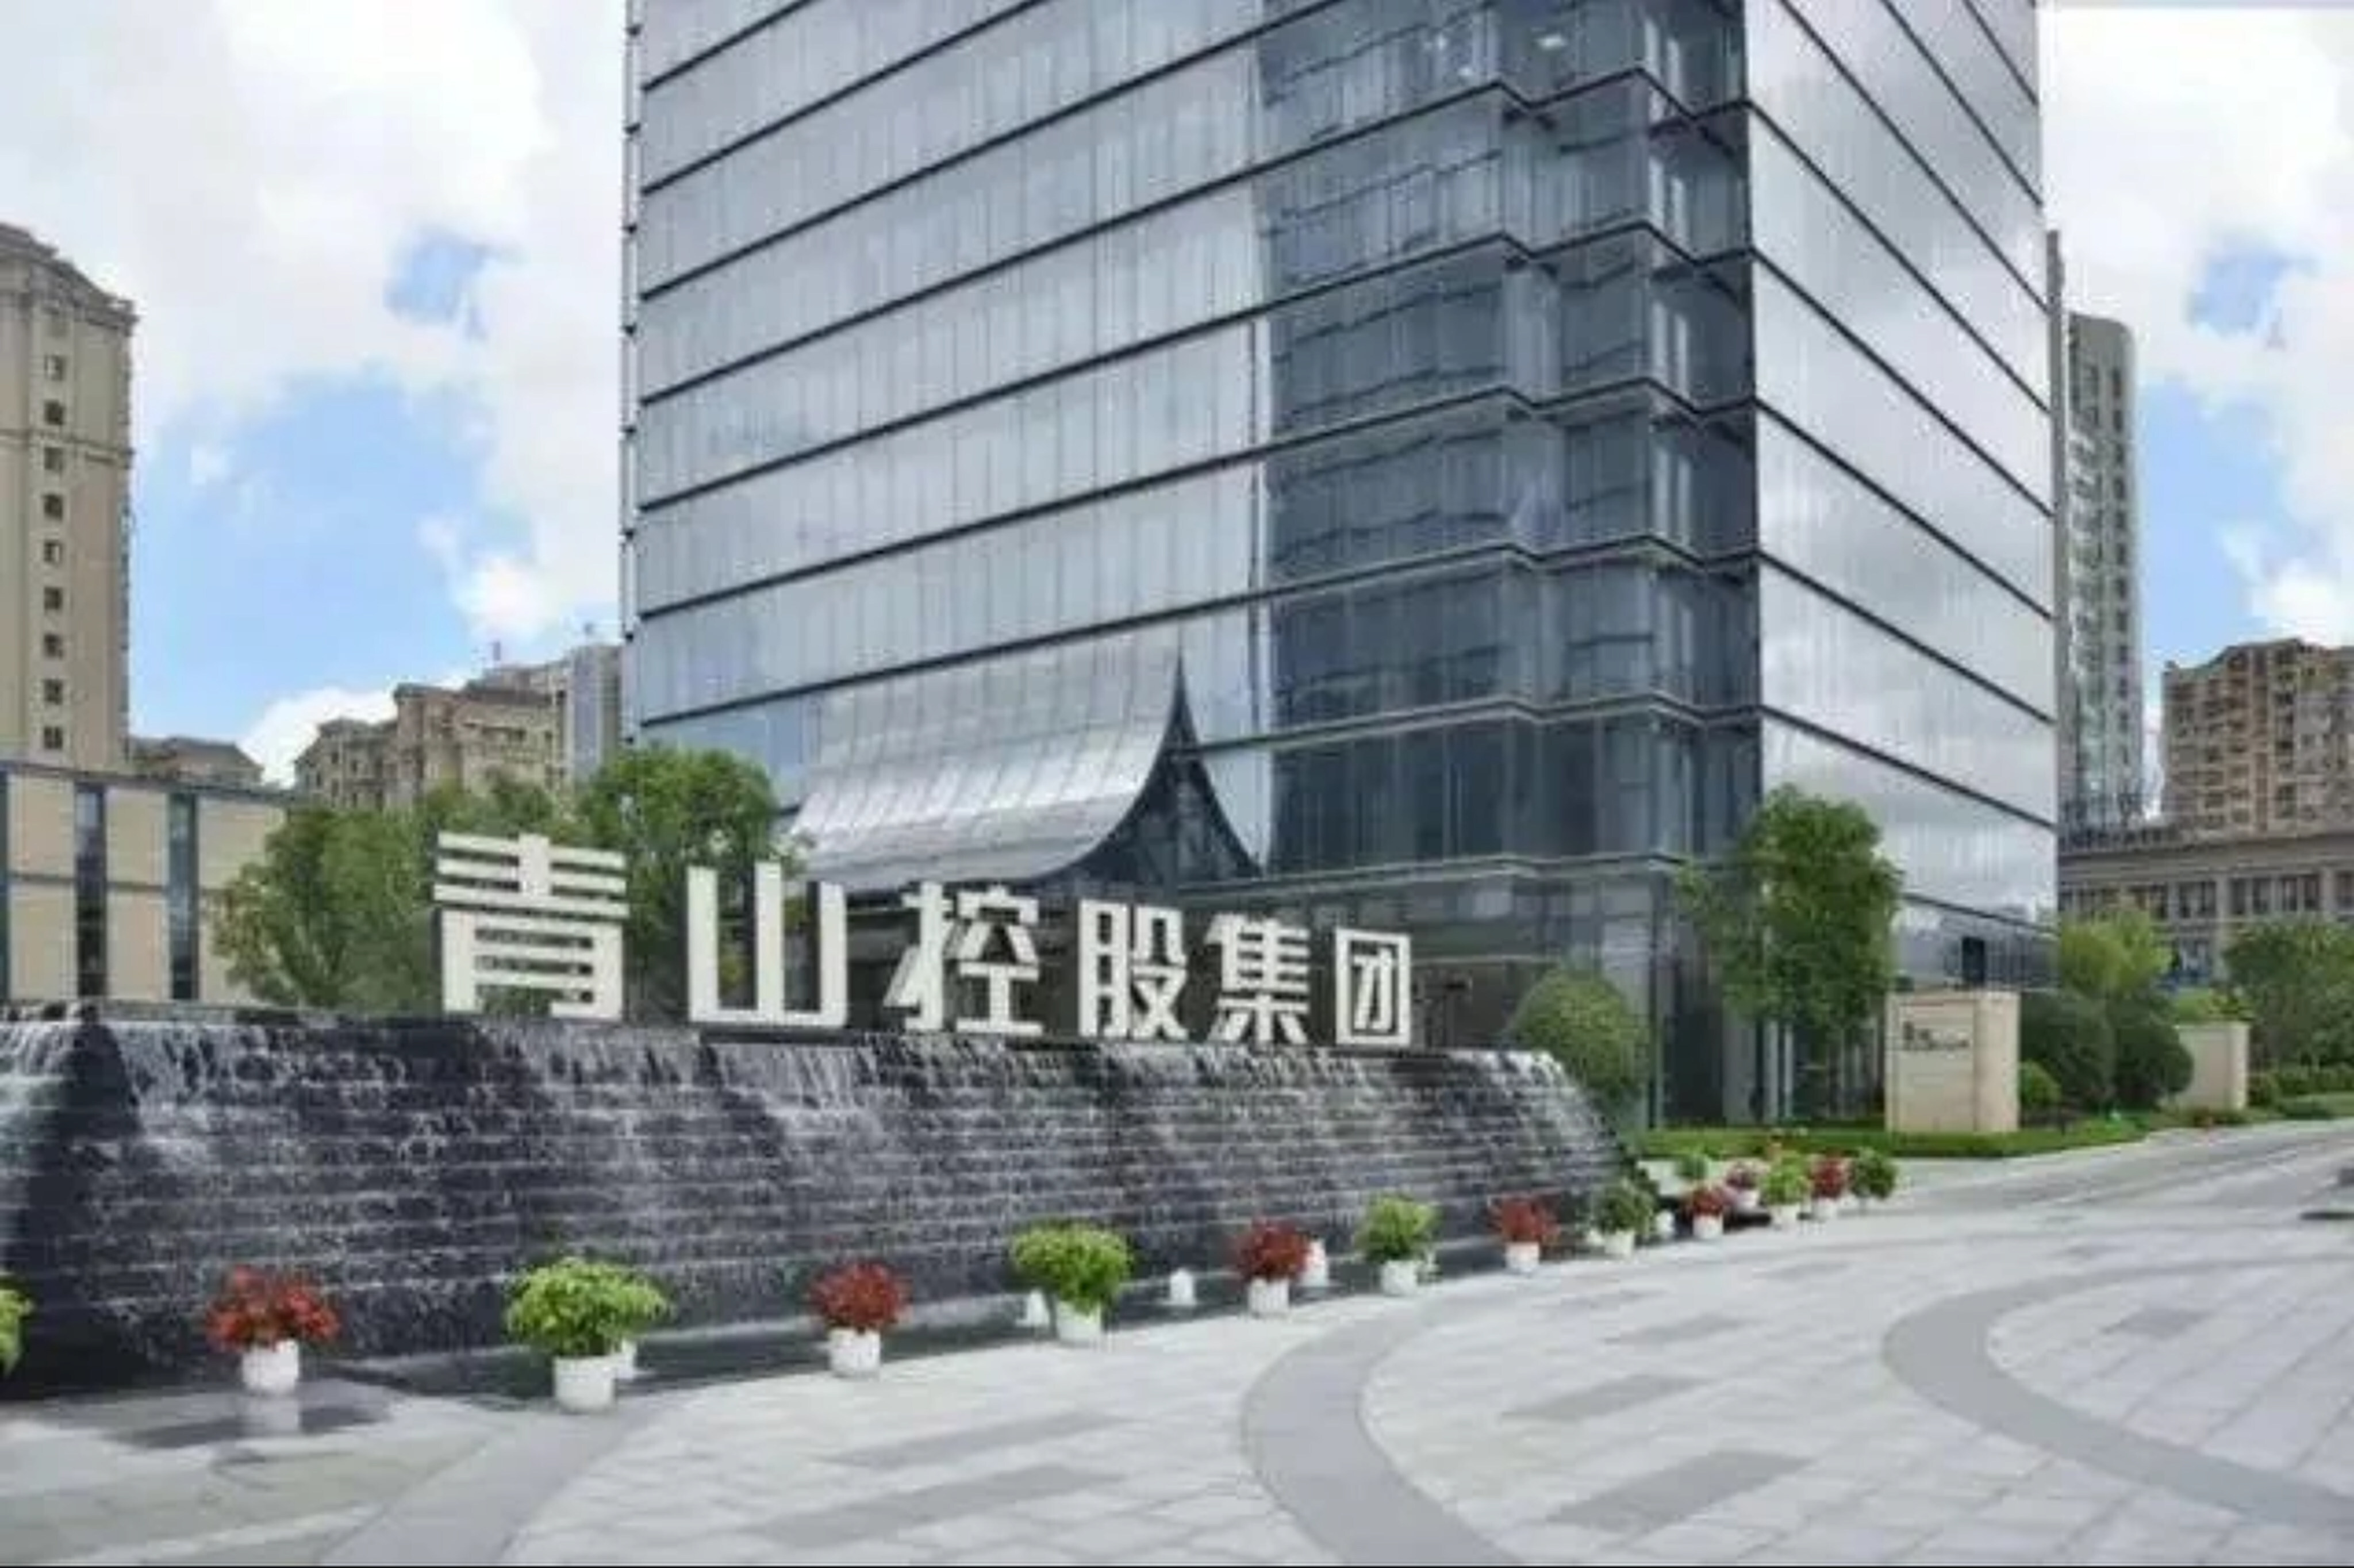 Tsingshan Holding Group has been struggling to pay margin calls to its brokers, according to people familiar with the situation. Photo: qq.com